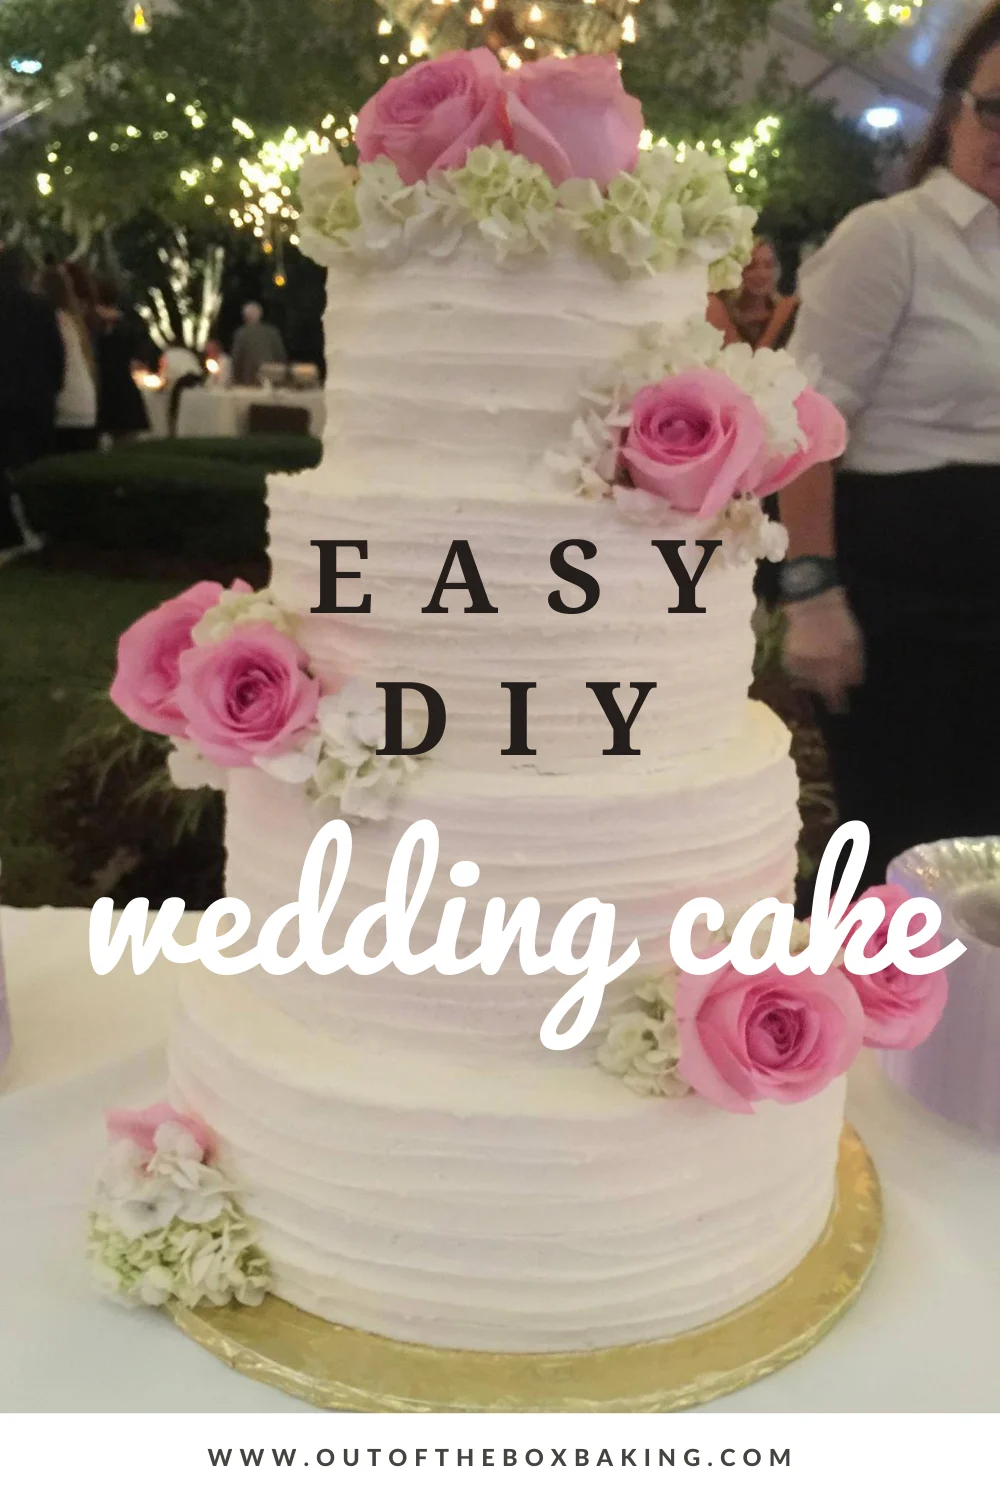 10 Wedding Cake Questions You Should Know – Honeypeachsg Bakery